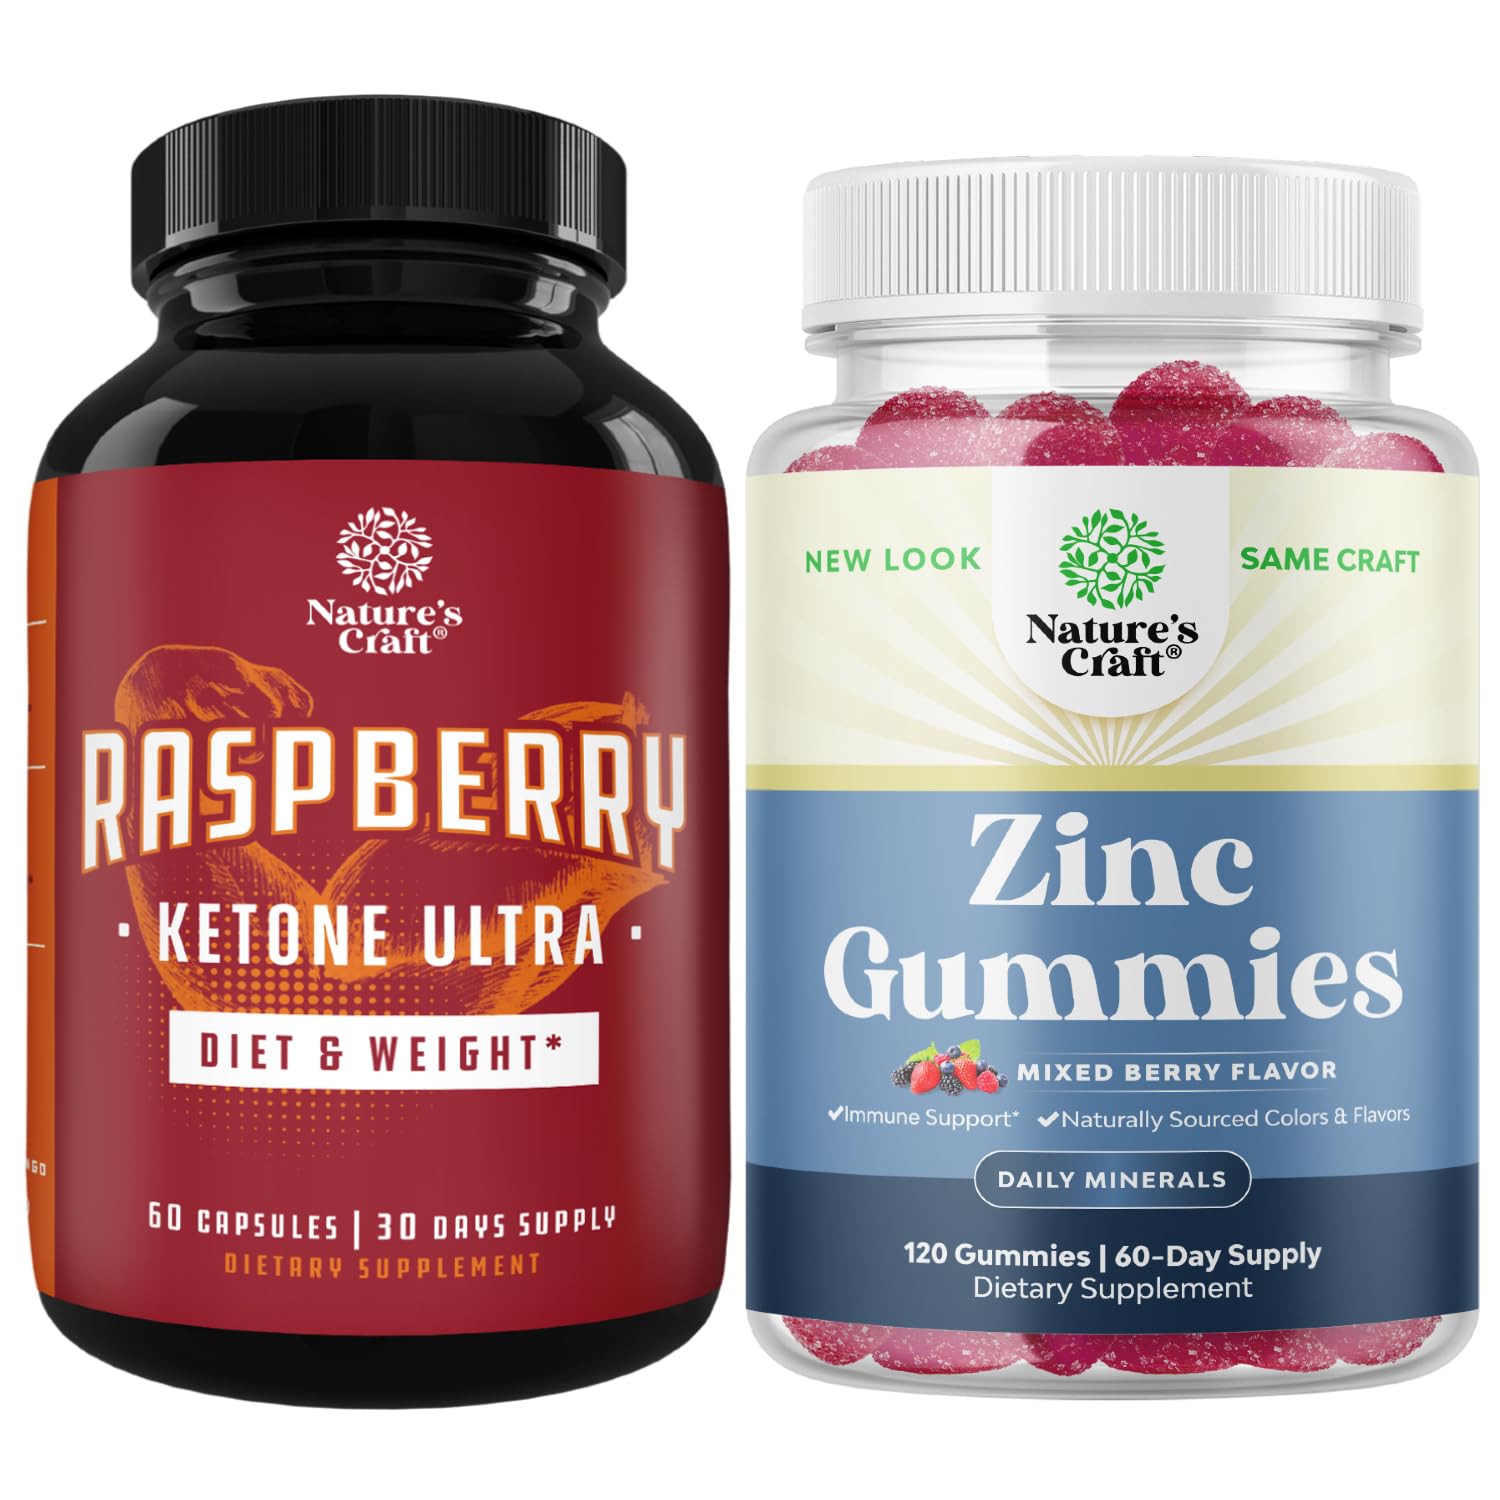 Bundle of Raspberry Ketones, Green Tea Extract & African Mango Blend and Extra Strength Zinc Gummies for Adults - Potent Ingredients to Speed Up Weight Loss, Gluten and Gelatin Free